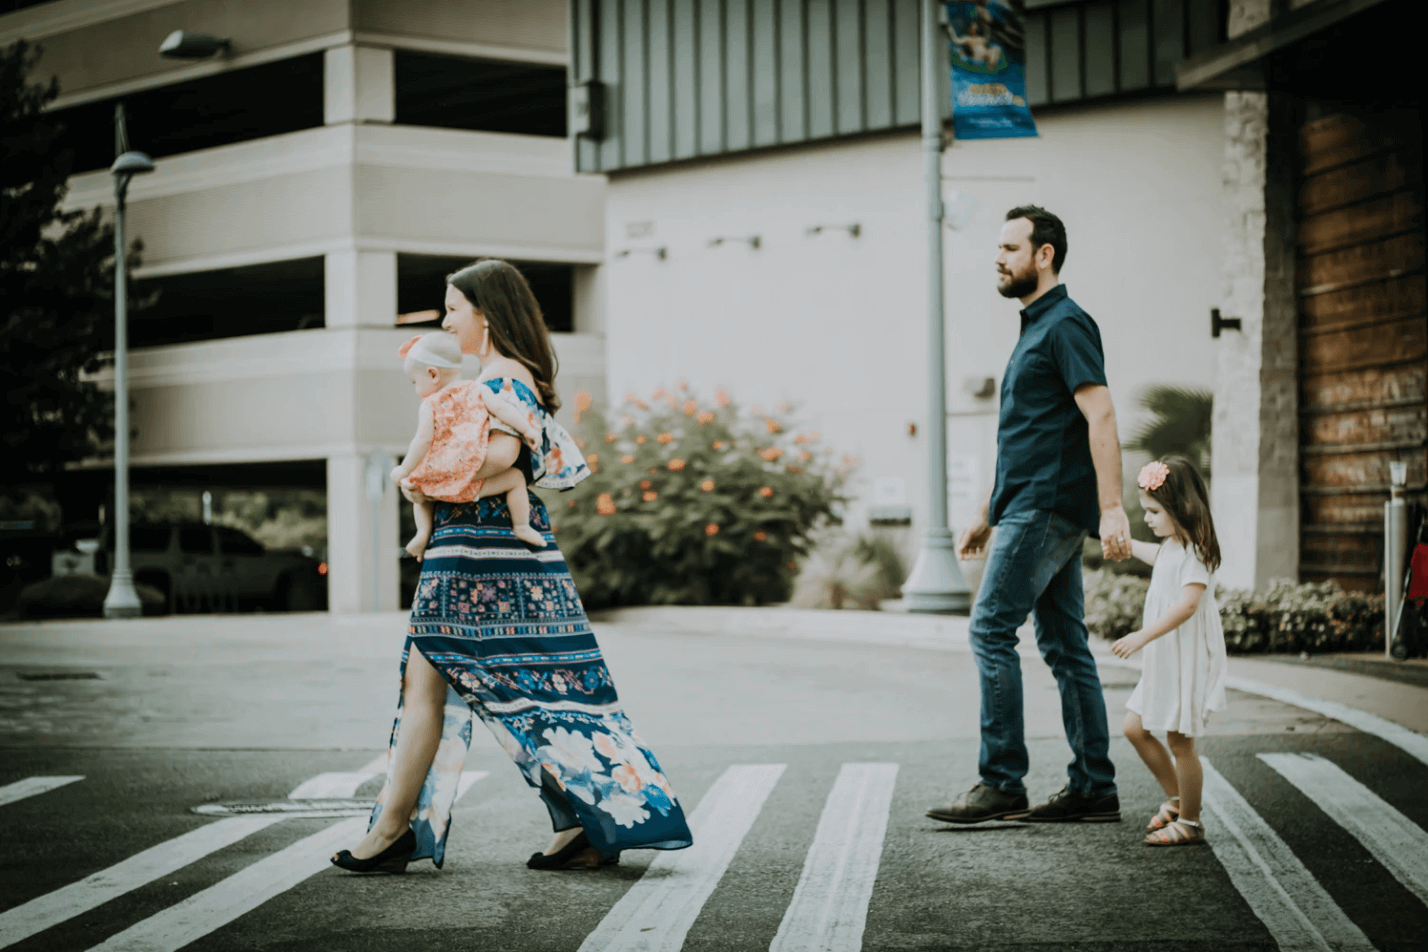 Family Crossing the Street.